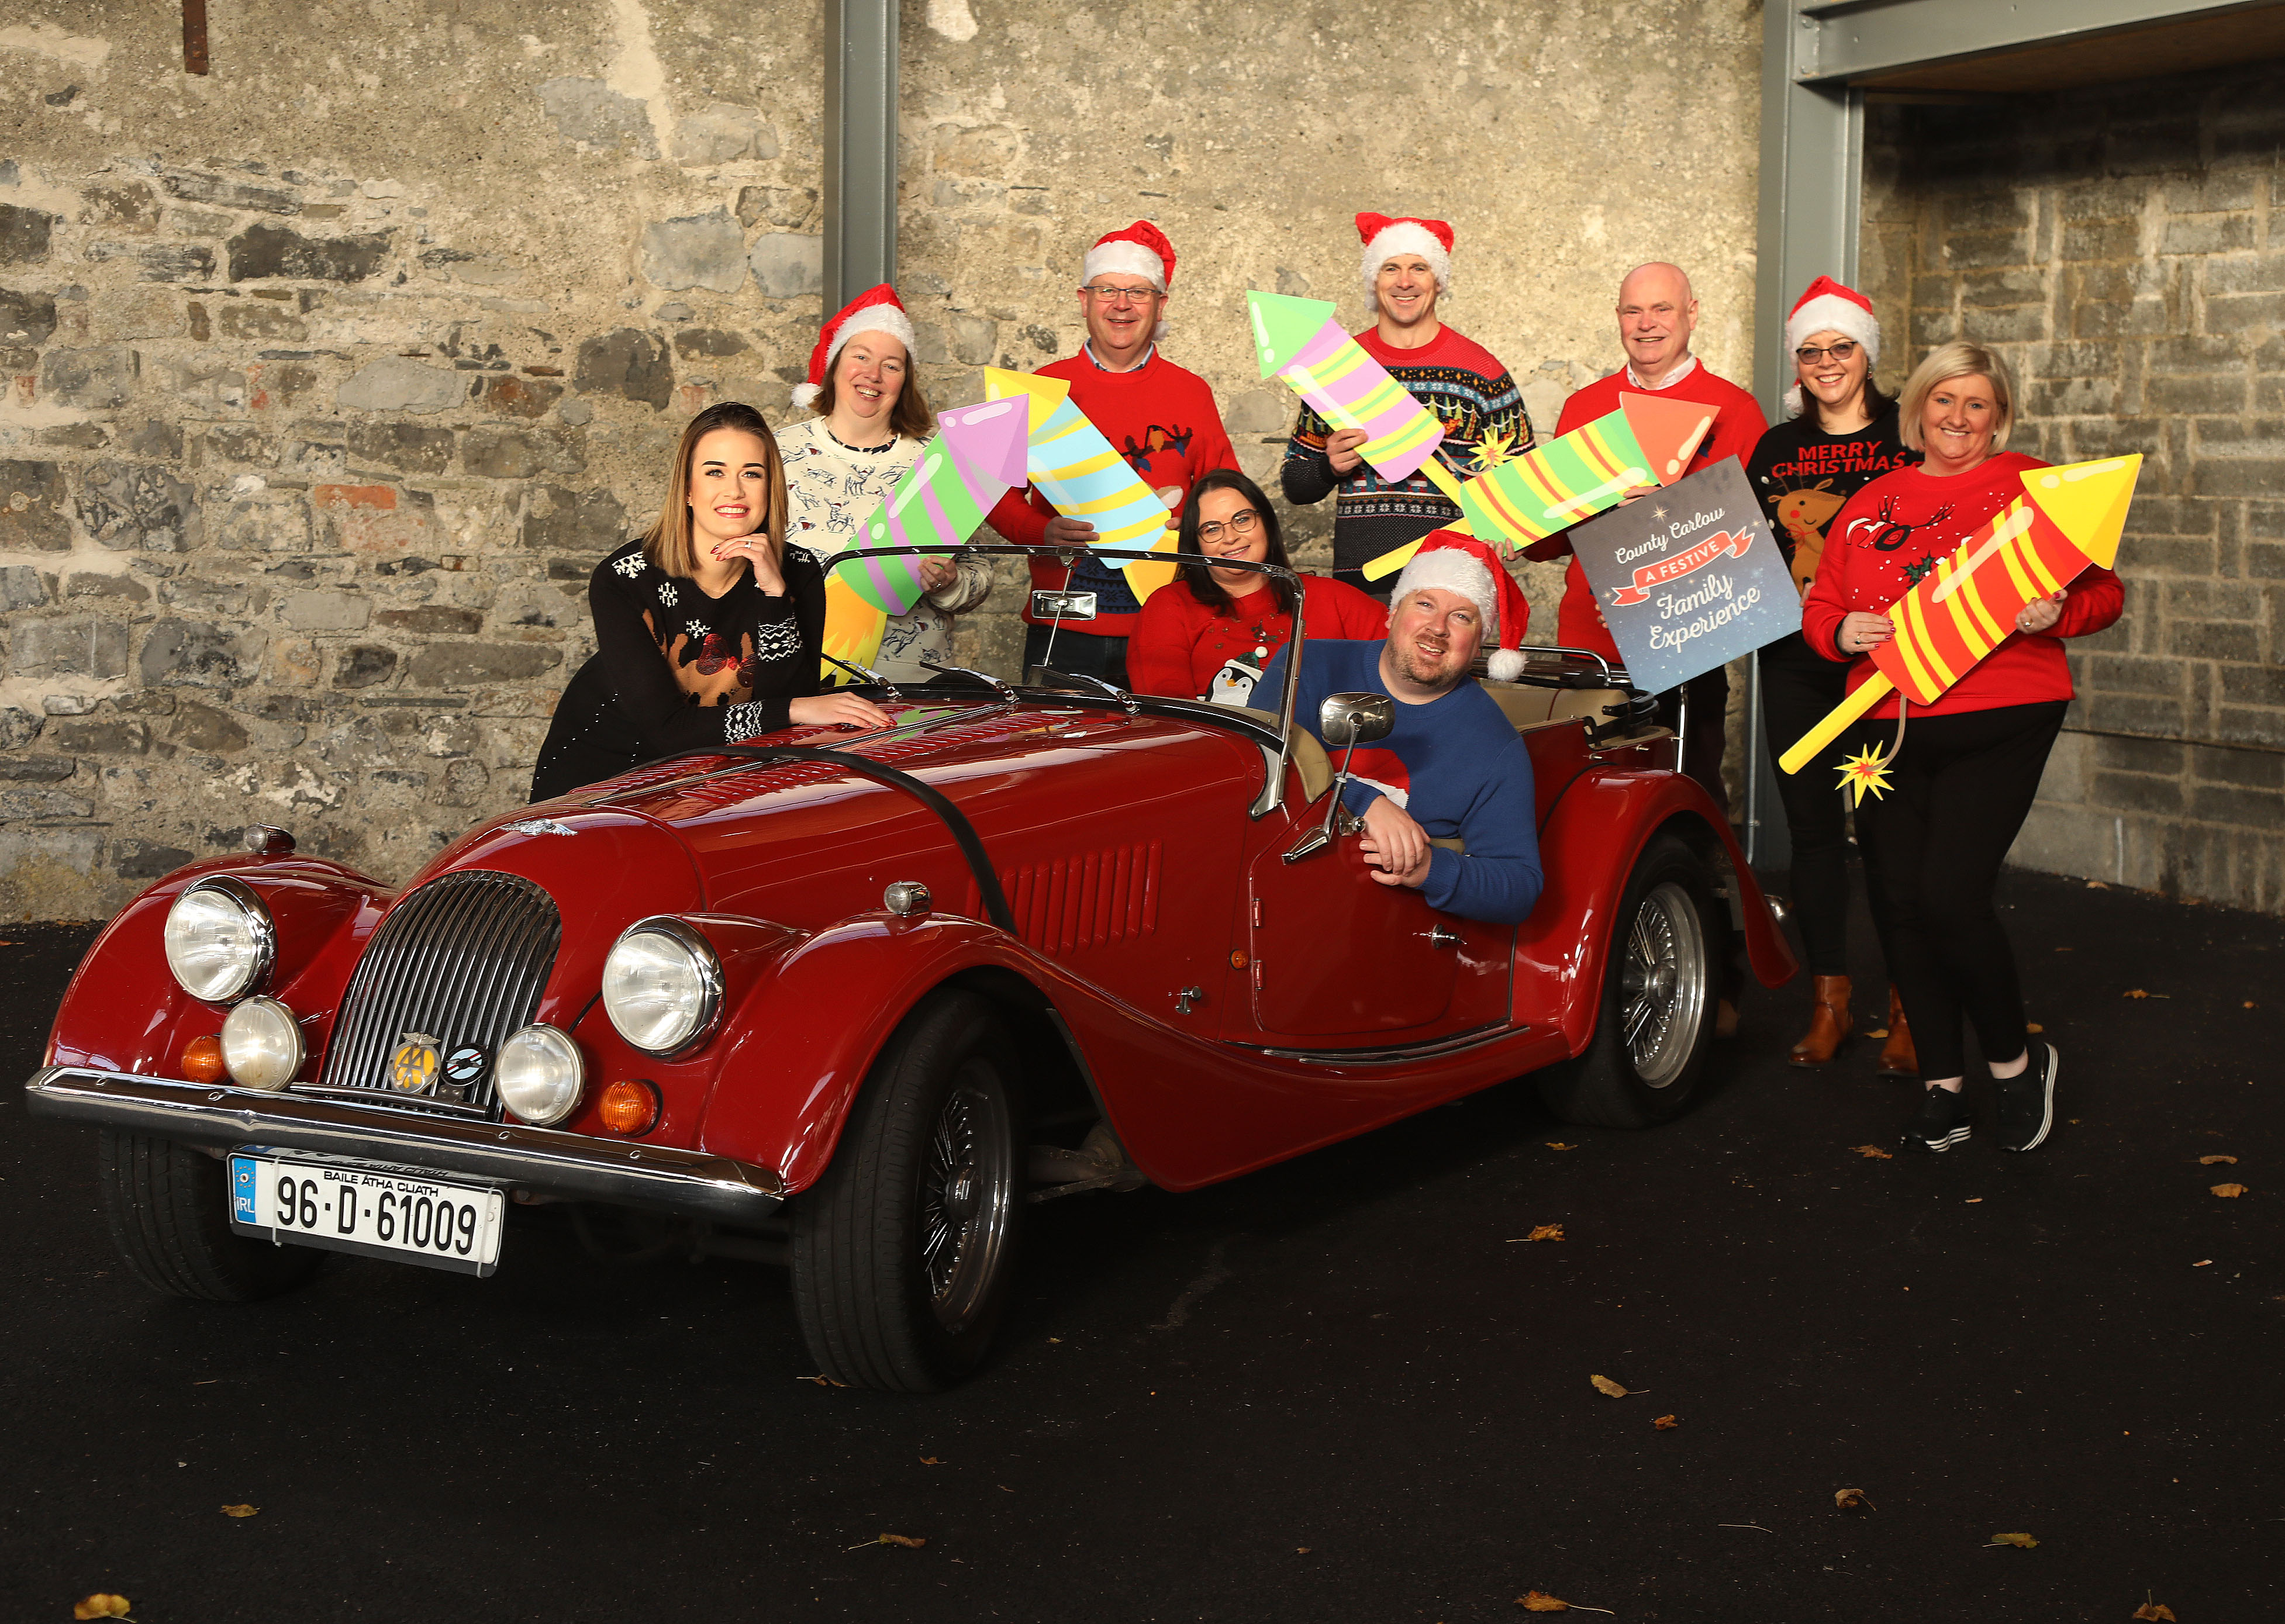 “Lightfest” – Carlow’s partnership for a festive family experience in 2022 